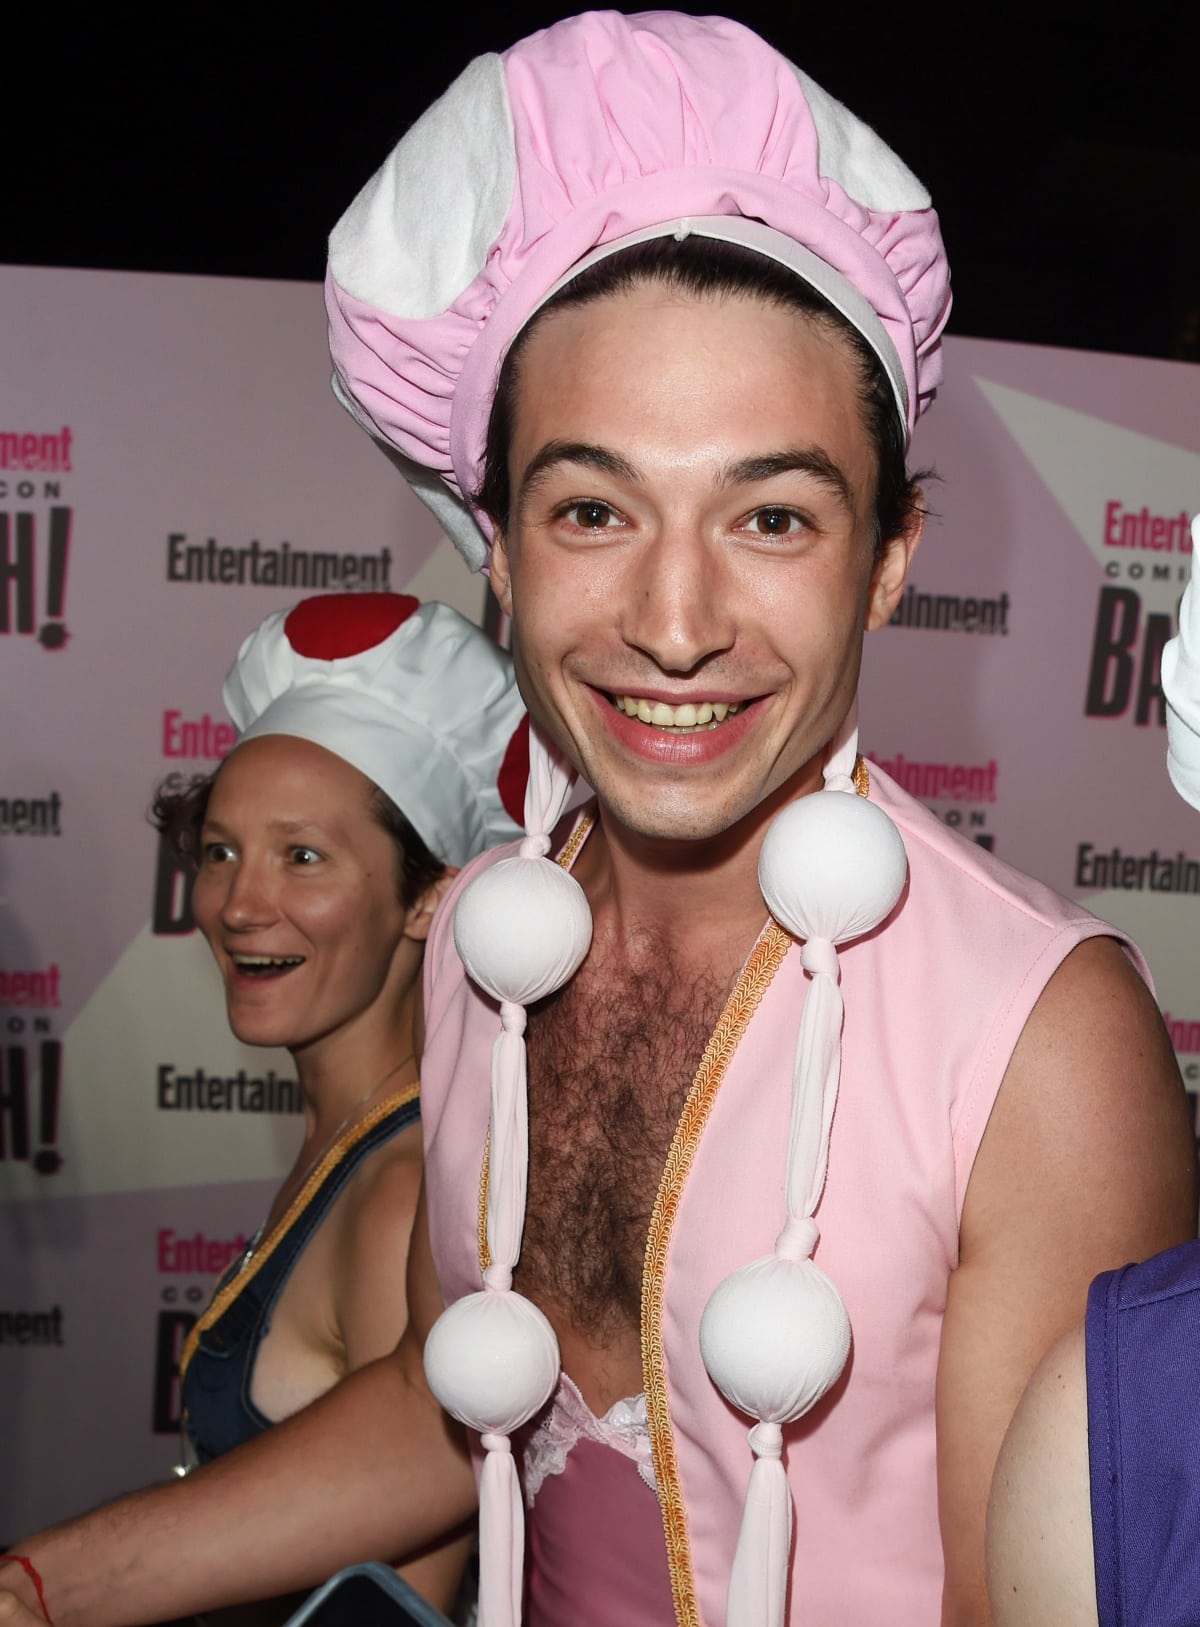 Ezra Miller in costume at the Entertainment Weekly Comic-Con Bash